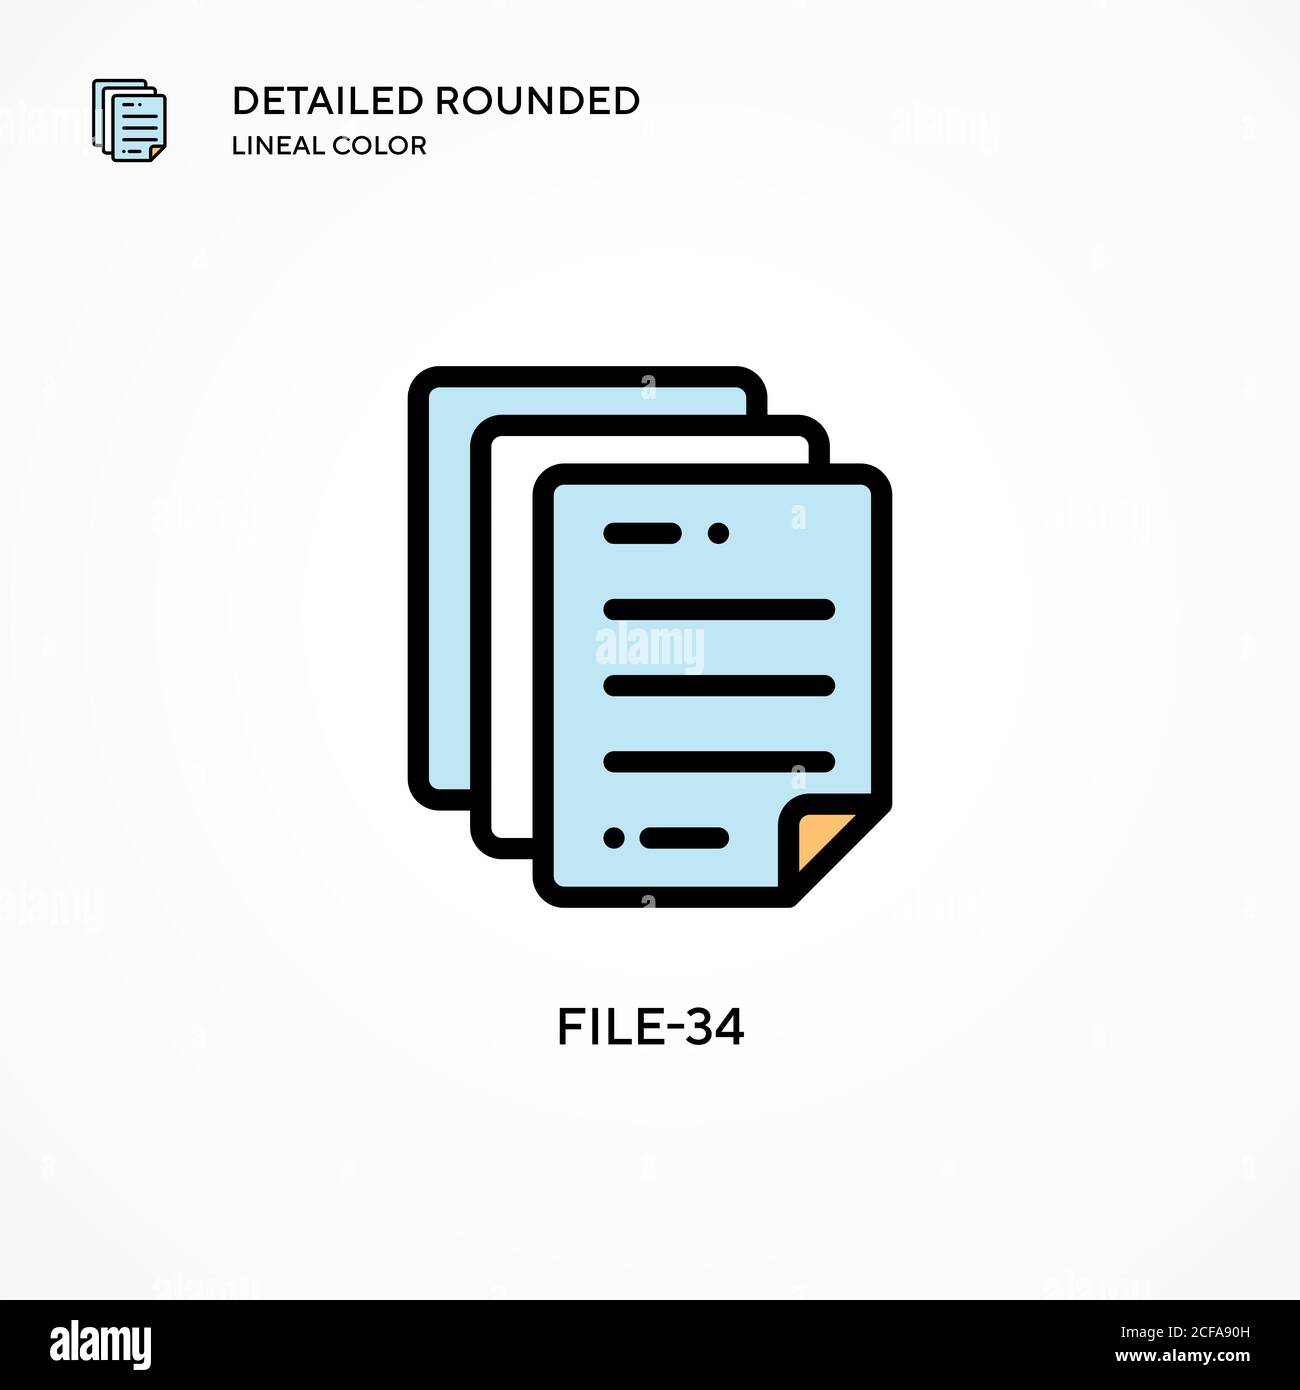 File-34 vector icon. Modern vector illustration concepts. Easy to edit and customize. Stock Vector